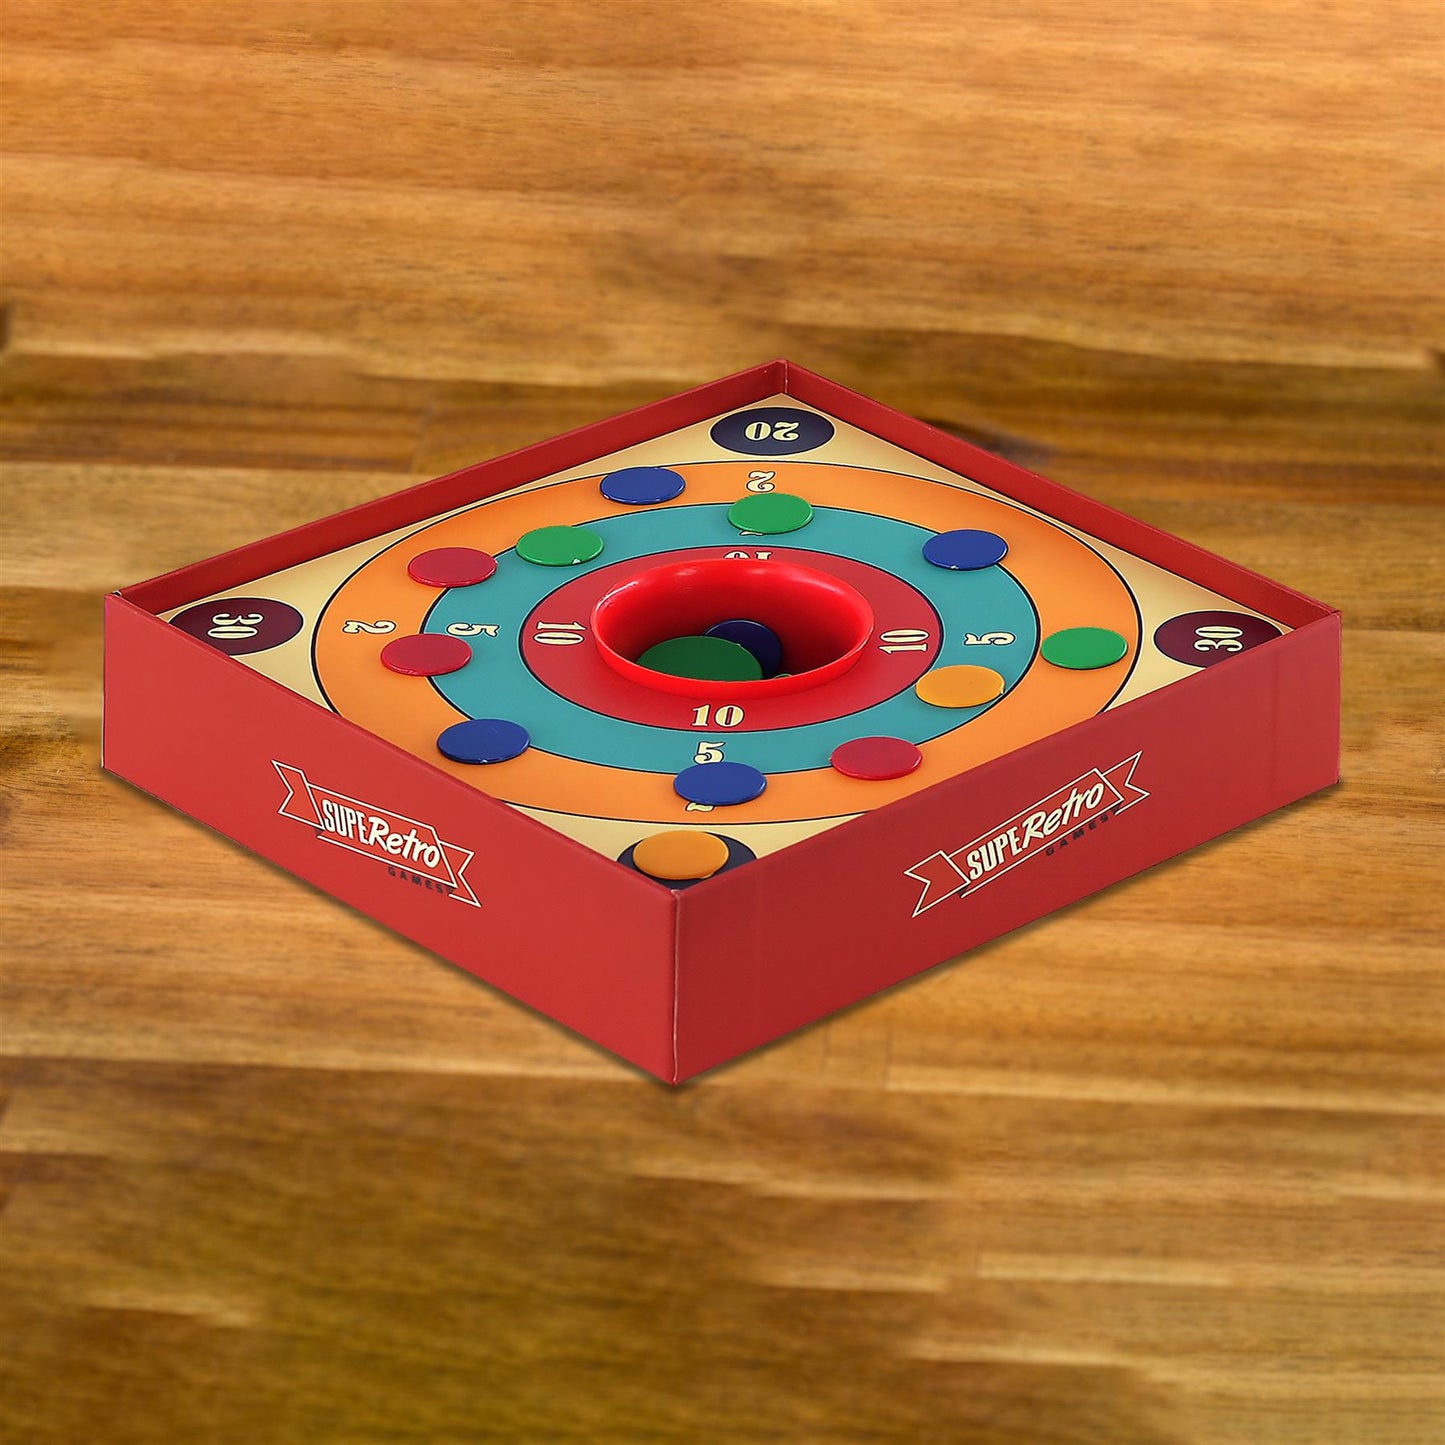 Traditional Tiddlywinks Game for 4 Players by The Magic Toy Shop - UKBuyZone